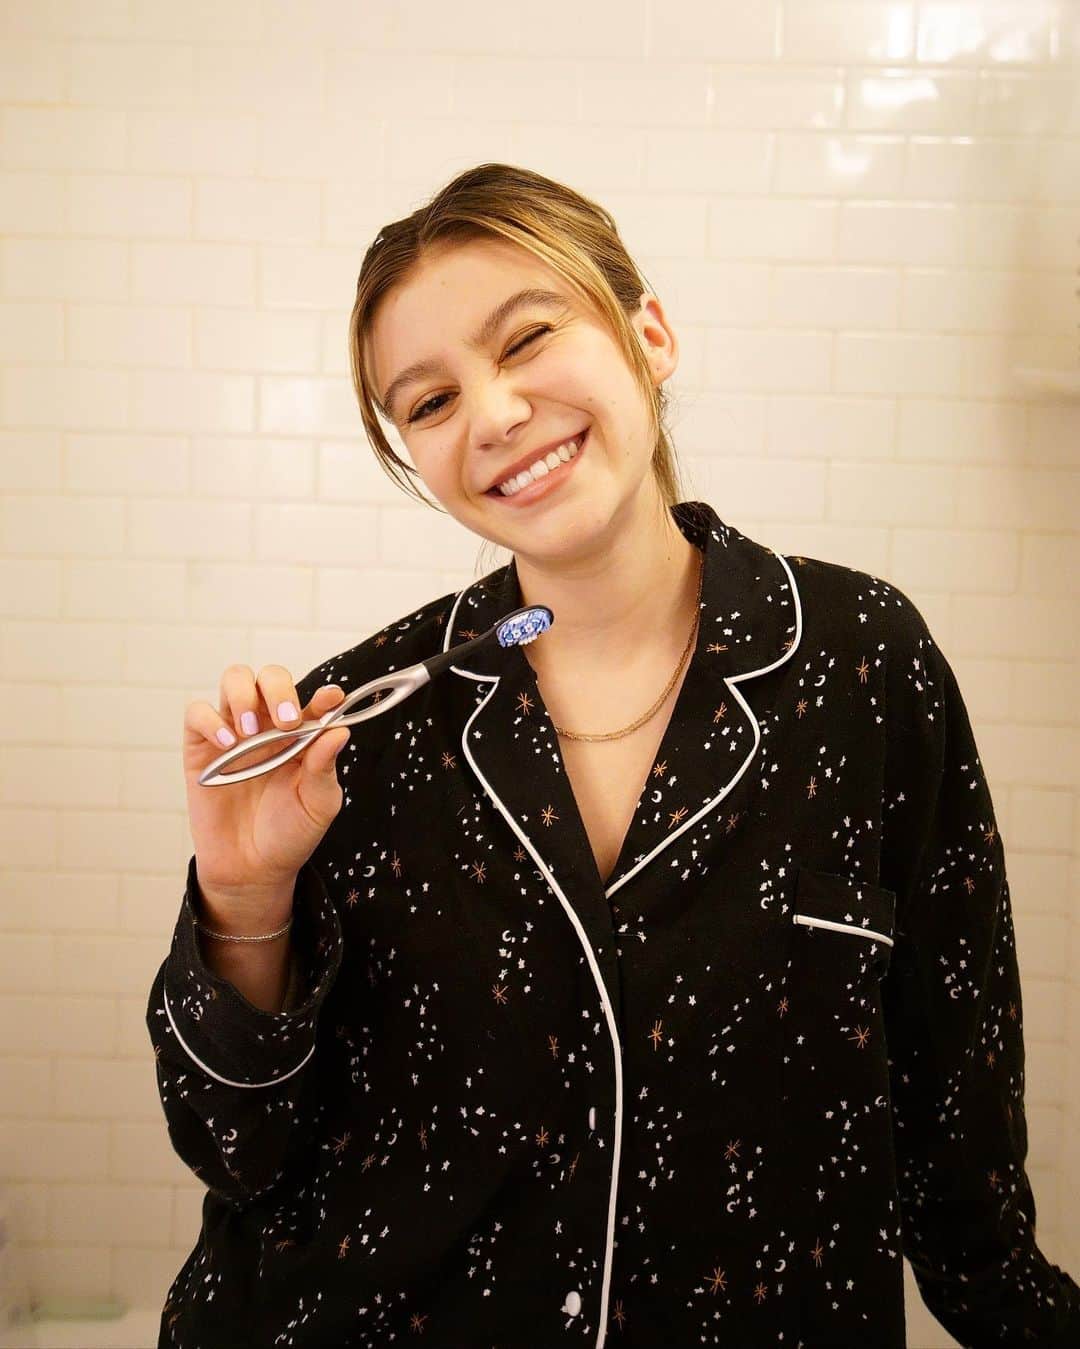 G・ハネリウスのインスタグラム：「Excited to partner with @colgate Taking care of my smile, and taking care of the environment with the new Colgate Keep Toothbrush!  #ColgatePartner @Colgate keep toothbrush handle is made with 100% Aluminum and has a replaceable head. This is legit the only toothbrush you will ever need. Every year over 1 billion toothbrushes end up in landfills because they can’t be recycled. It makes me happy to make a small step towards living a more sustainable life and helping the environment. #ColgateKeepForGood #ad」